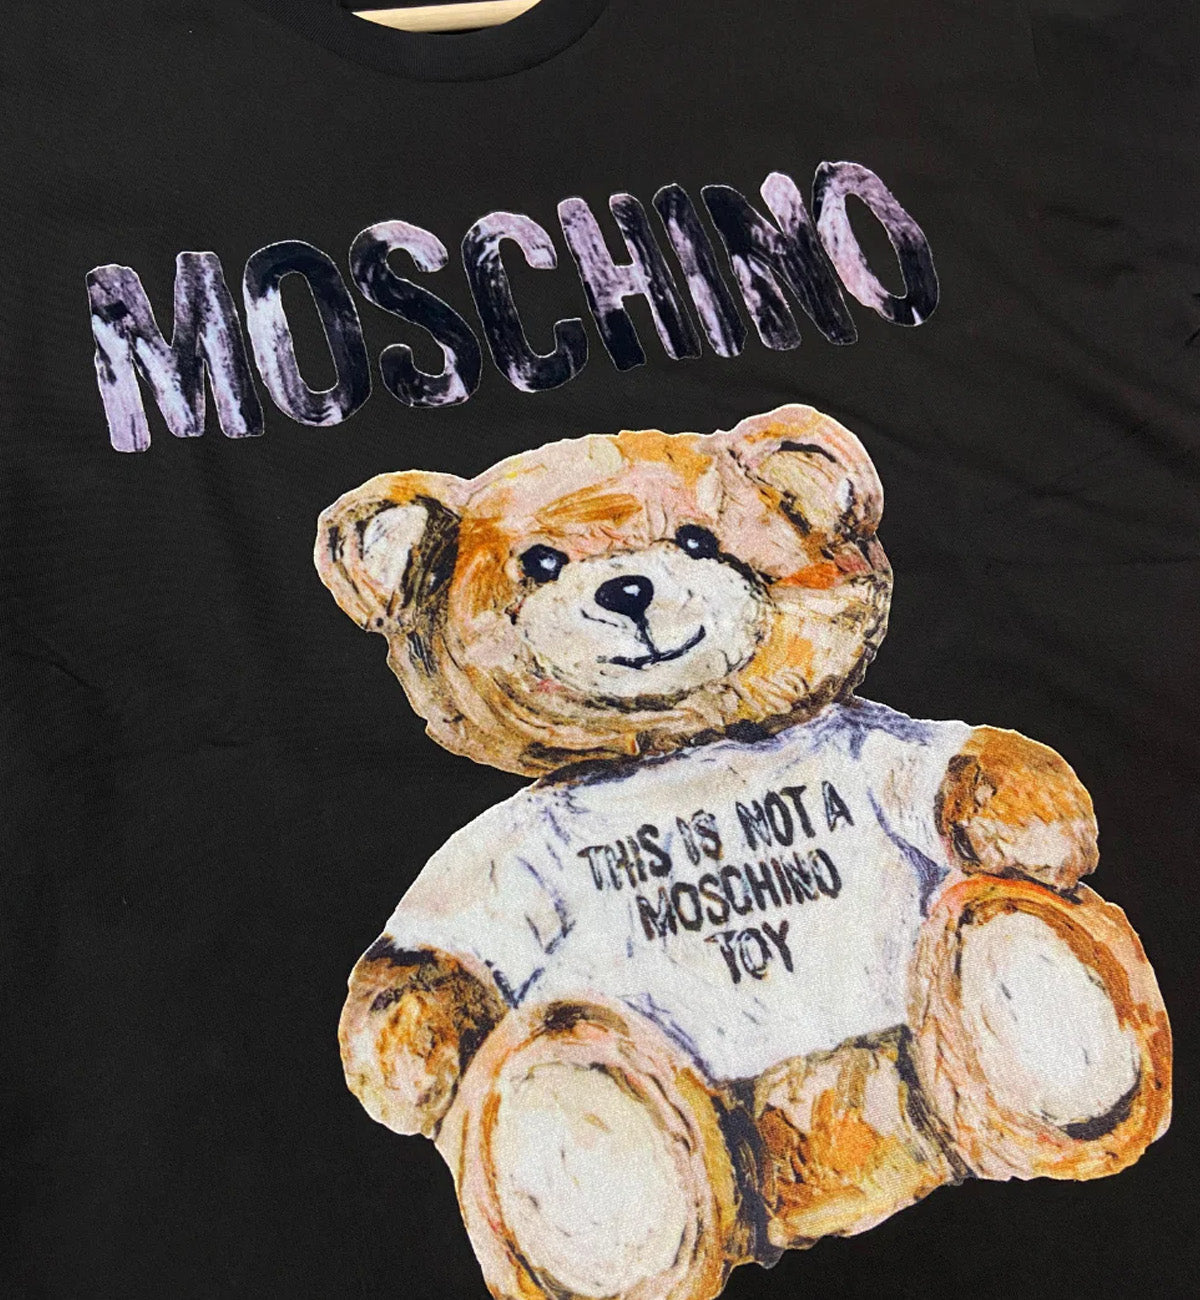 Moschino This Is Not A Moschino Toy Printed T-Shirt (Black)